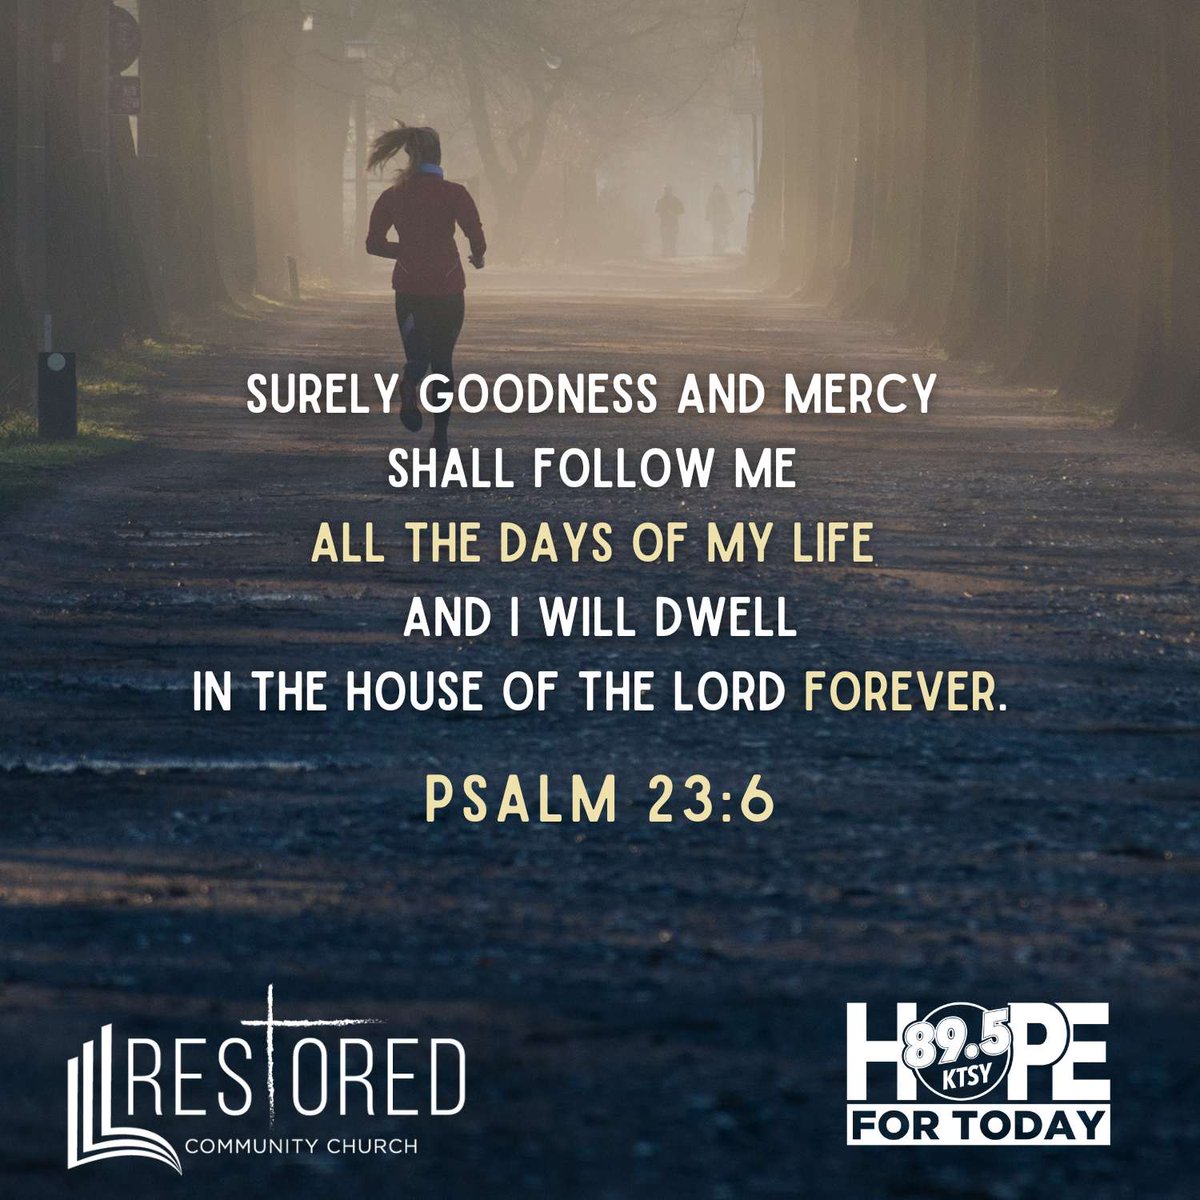 God's goodness and mercy are chasing you down. #hopefortoday #choosehope #bible #scripture